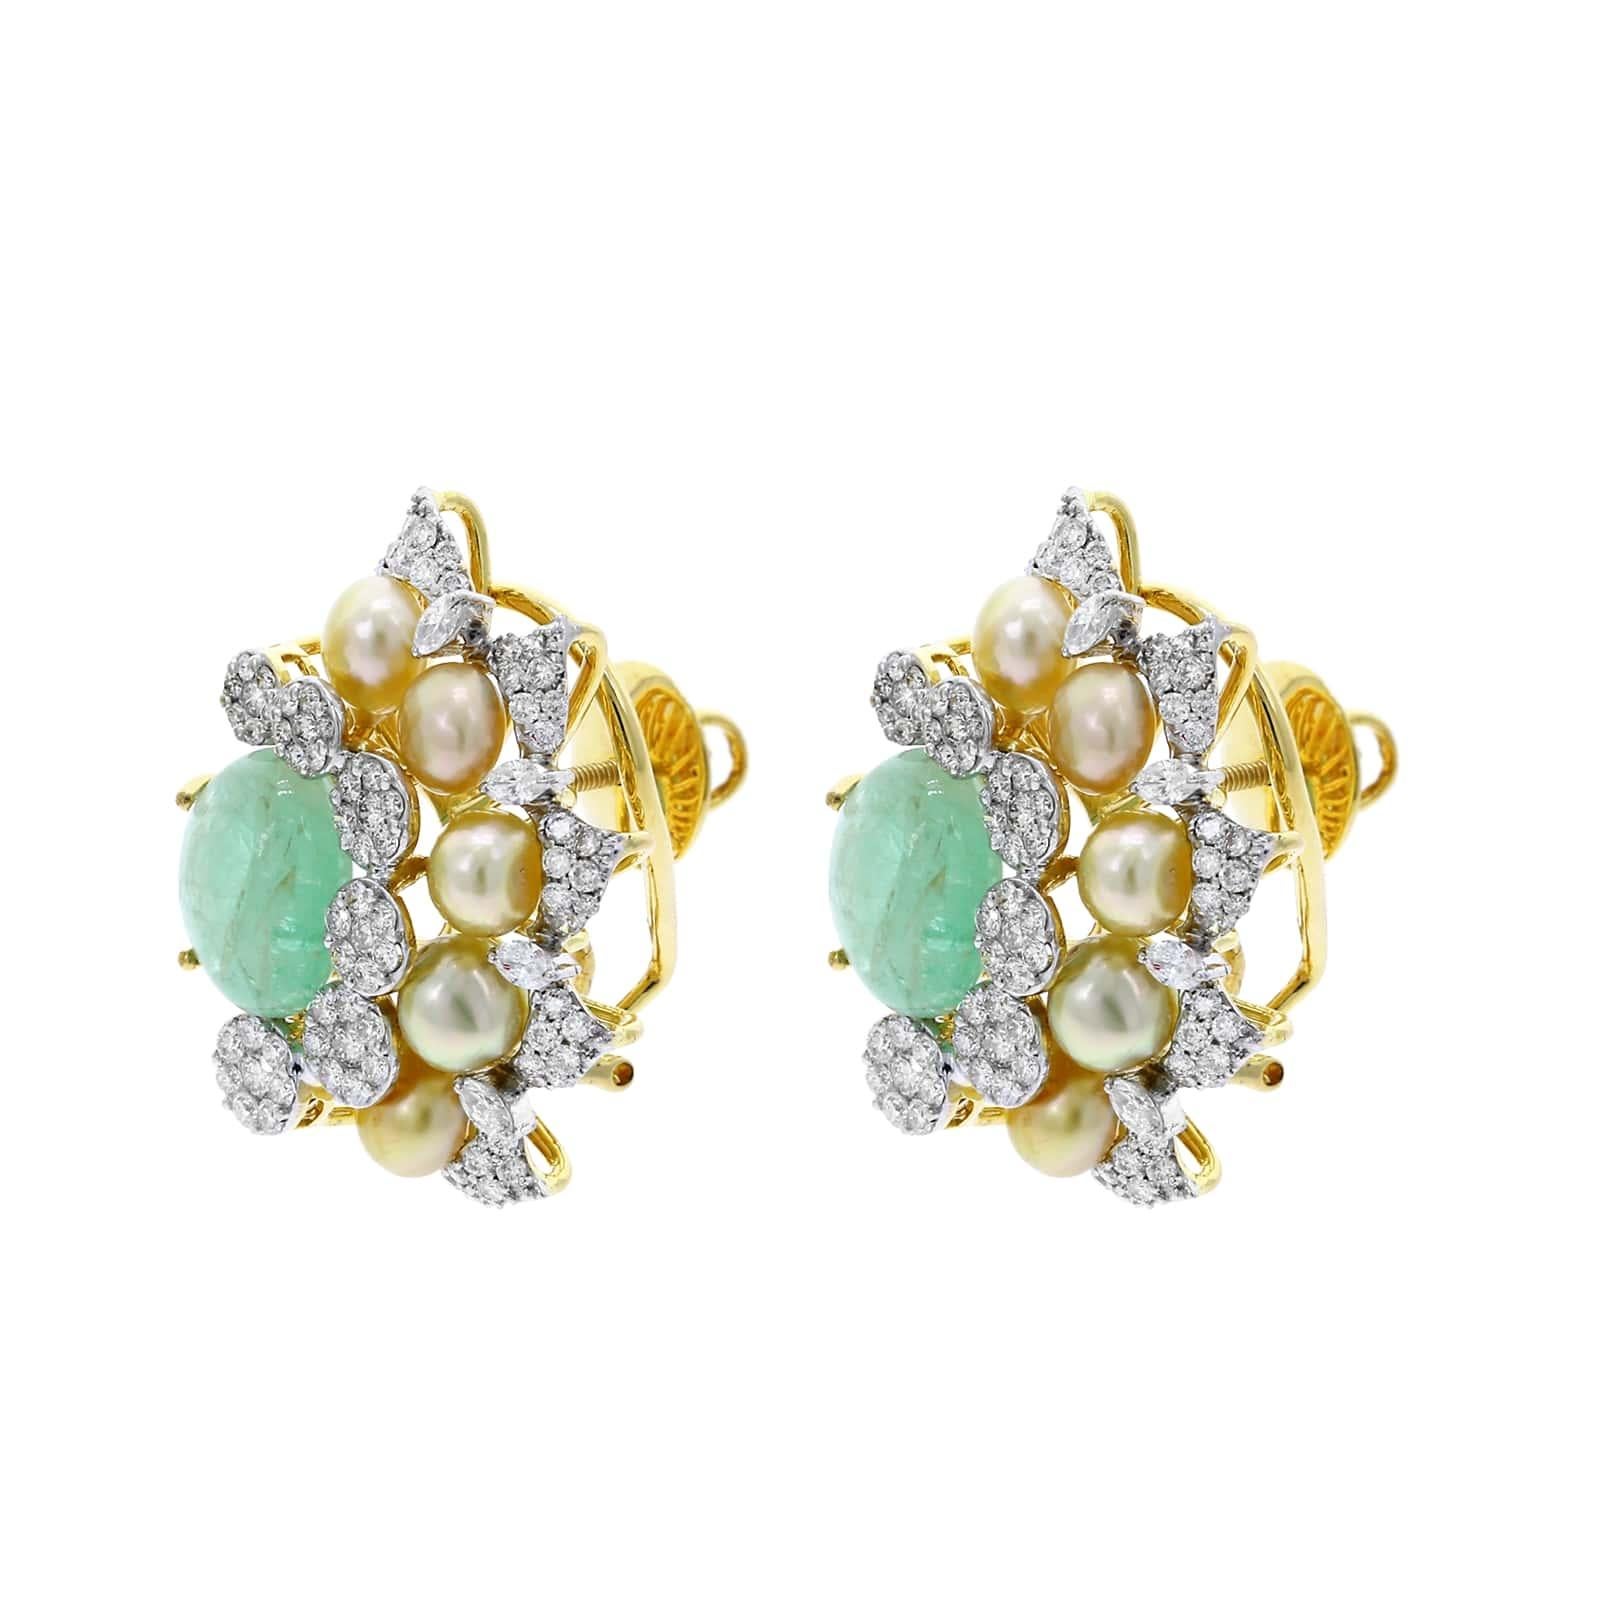 Women's or Men's Curved Emerald, Diamond, and Pearl Earrings, 18 Karat Gold